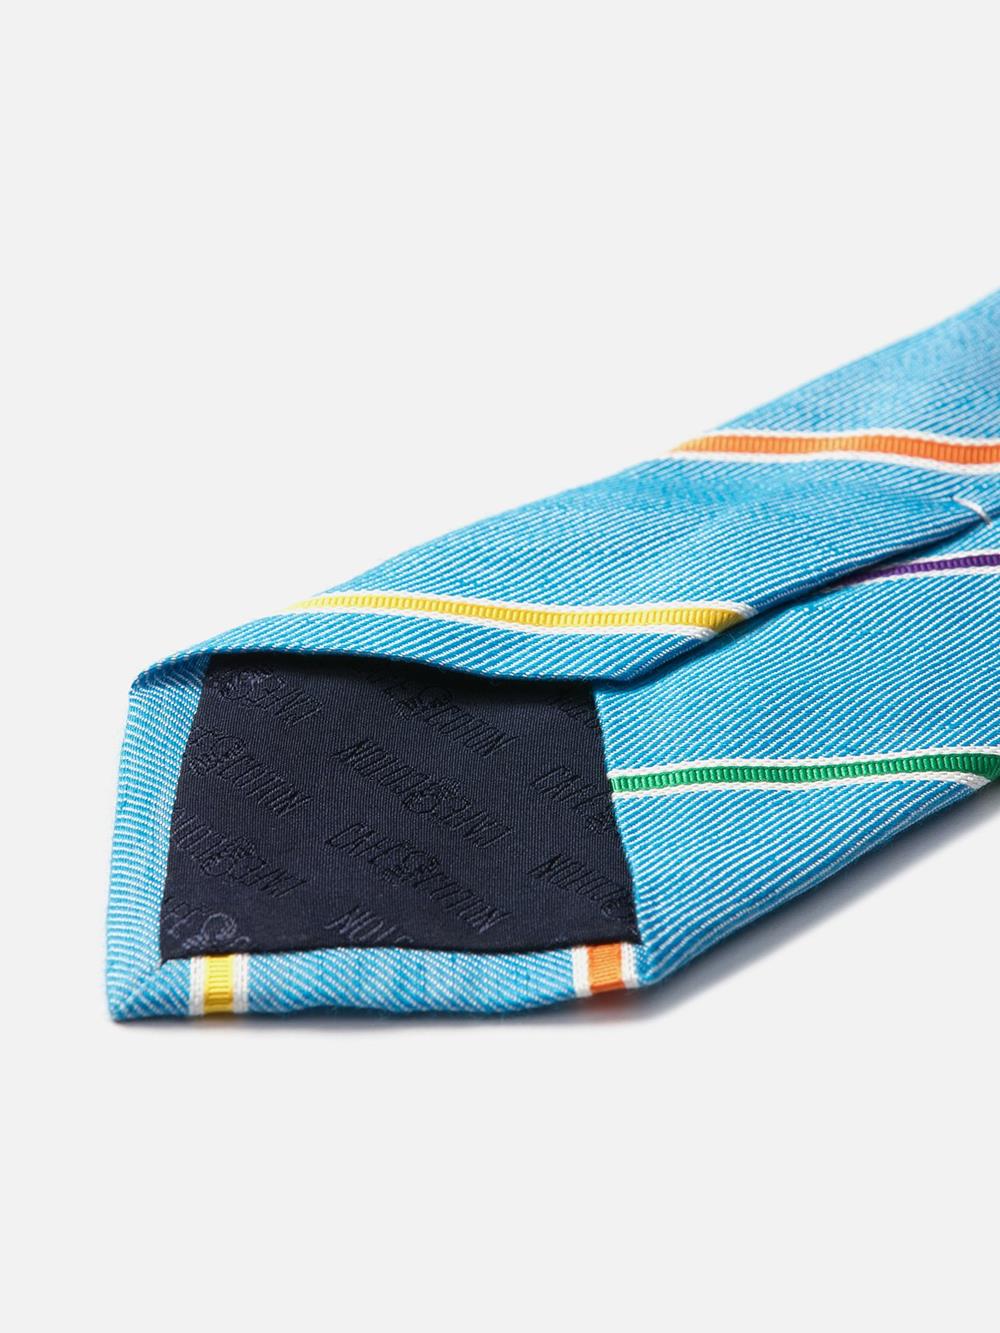 Turquoise silk tie and multicolored stripes